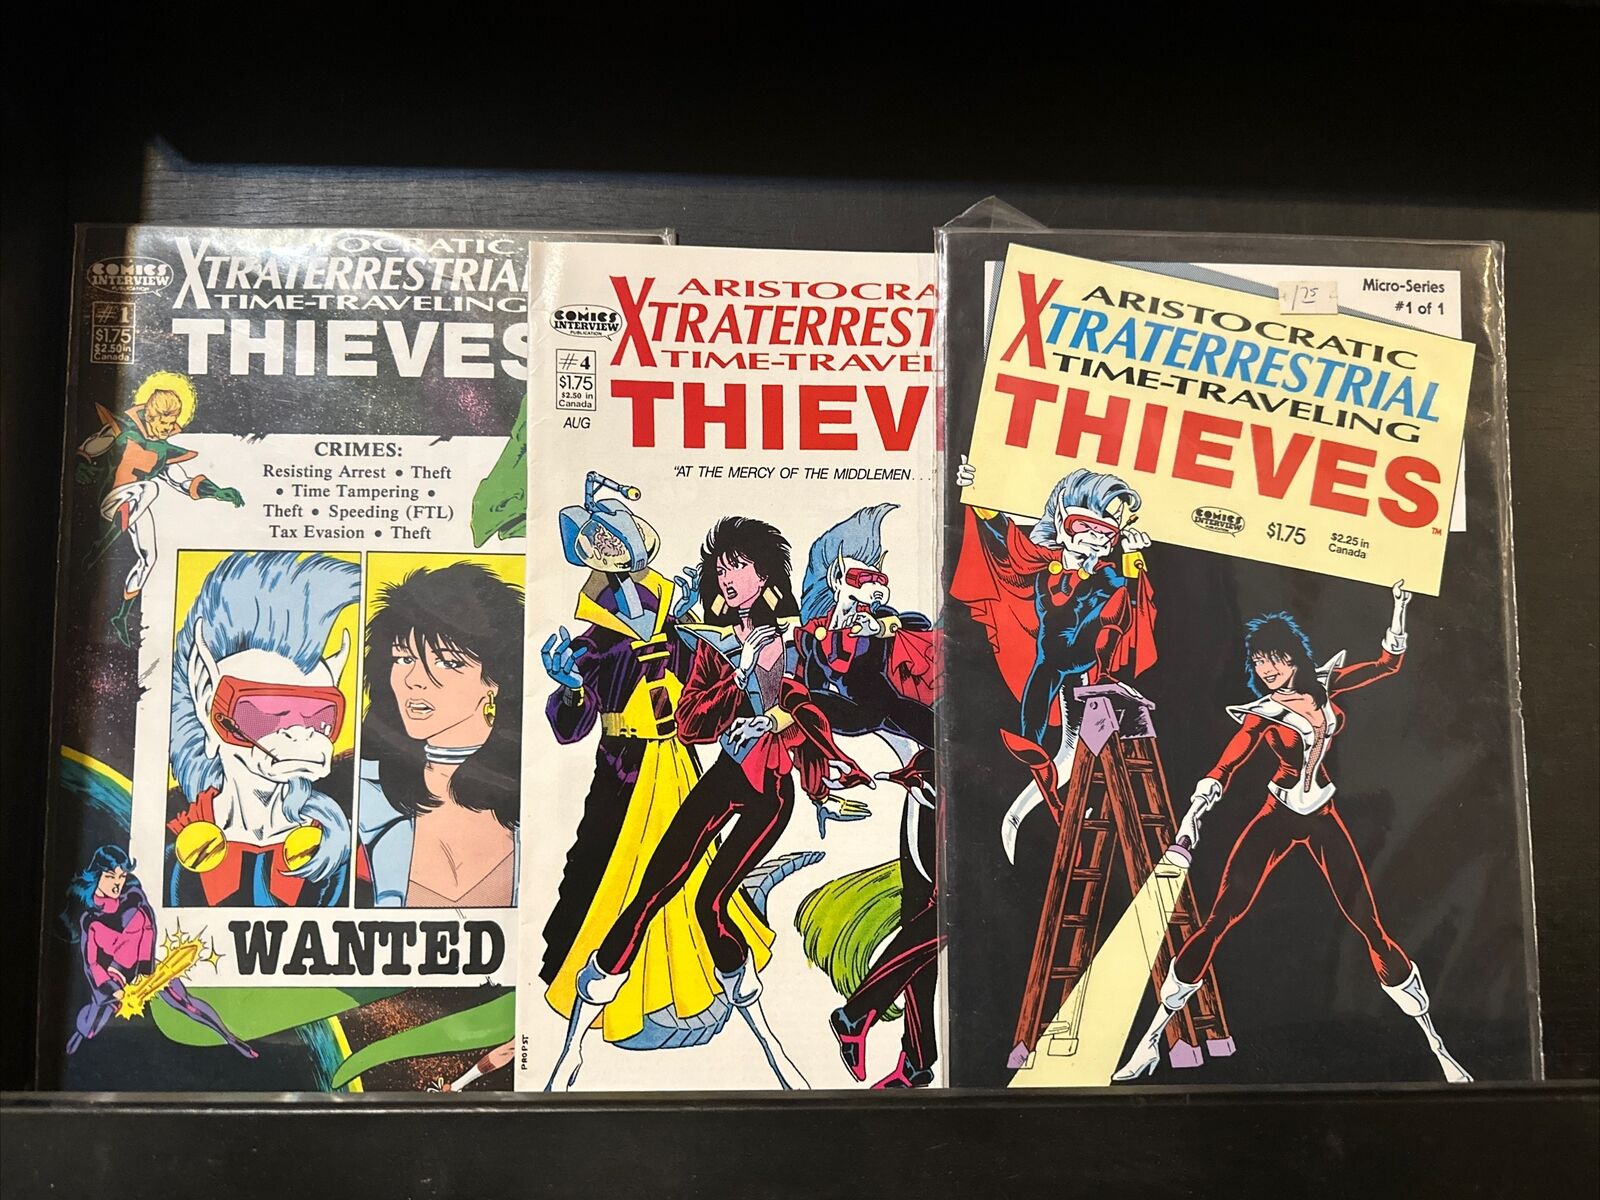 Aristocratic Xtraterrestrial Time-Traveling Thieves #1,4 Run (1987) & 1 of 1